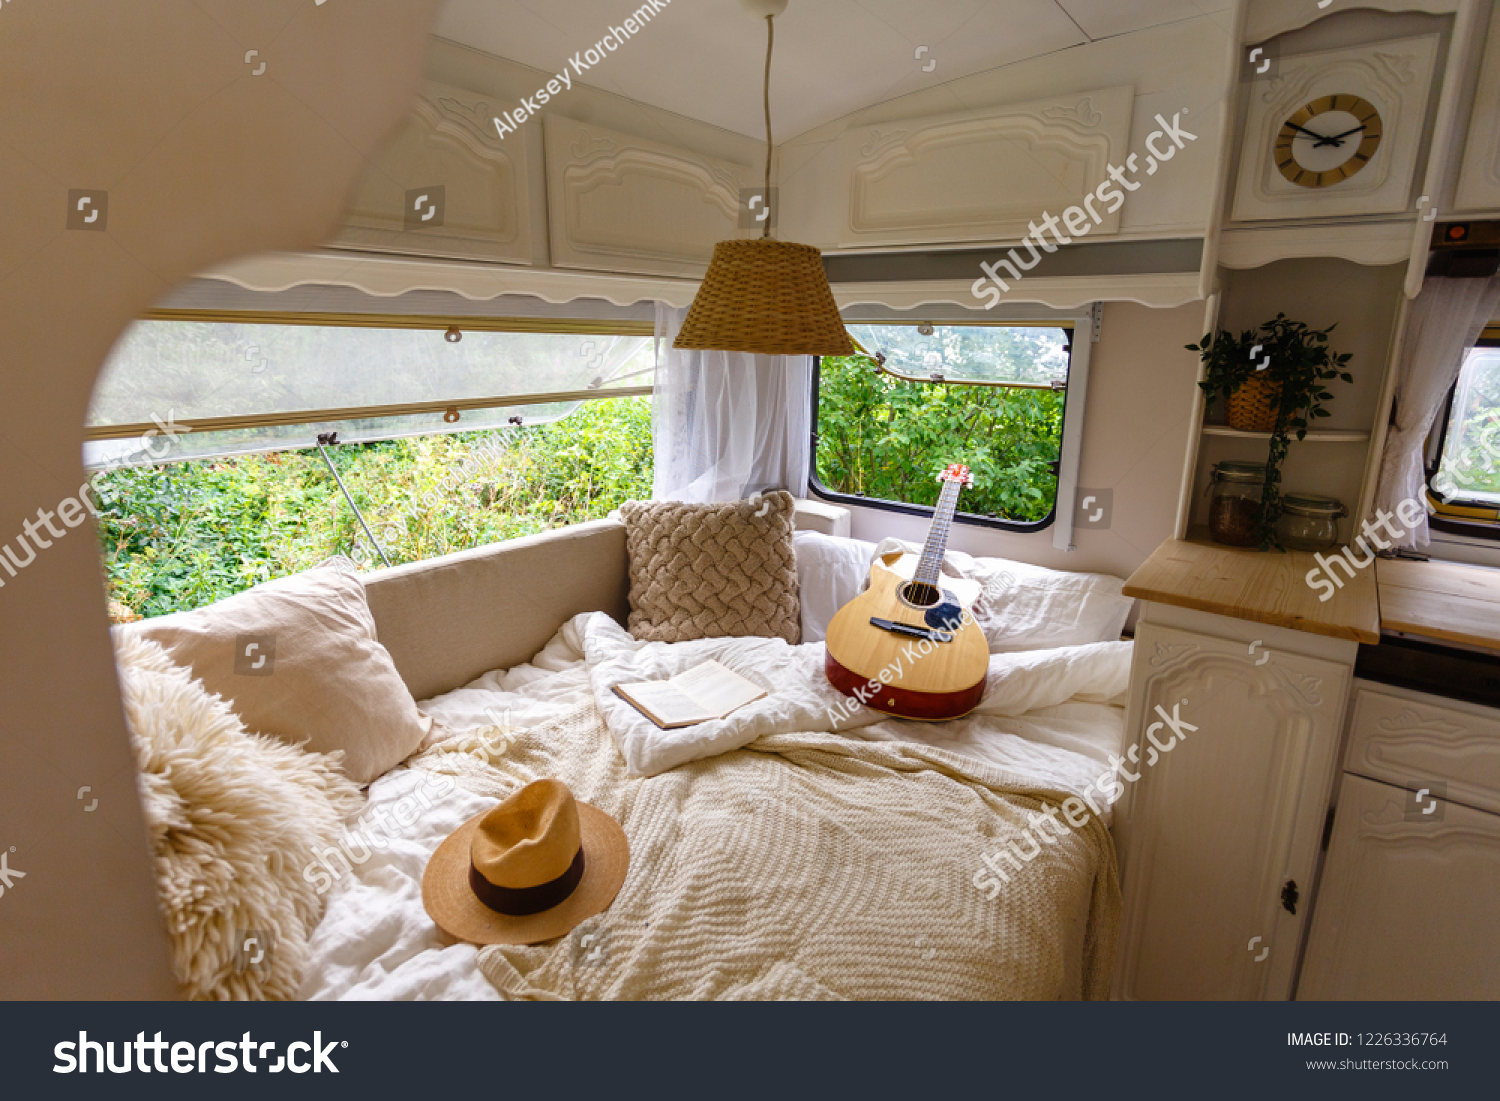 Inside Camper Van Unfilled Bed Pillows Stock Photo Edit Now